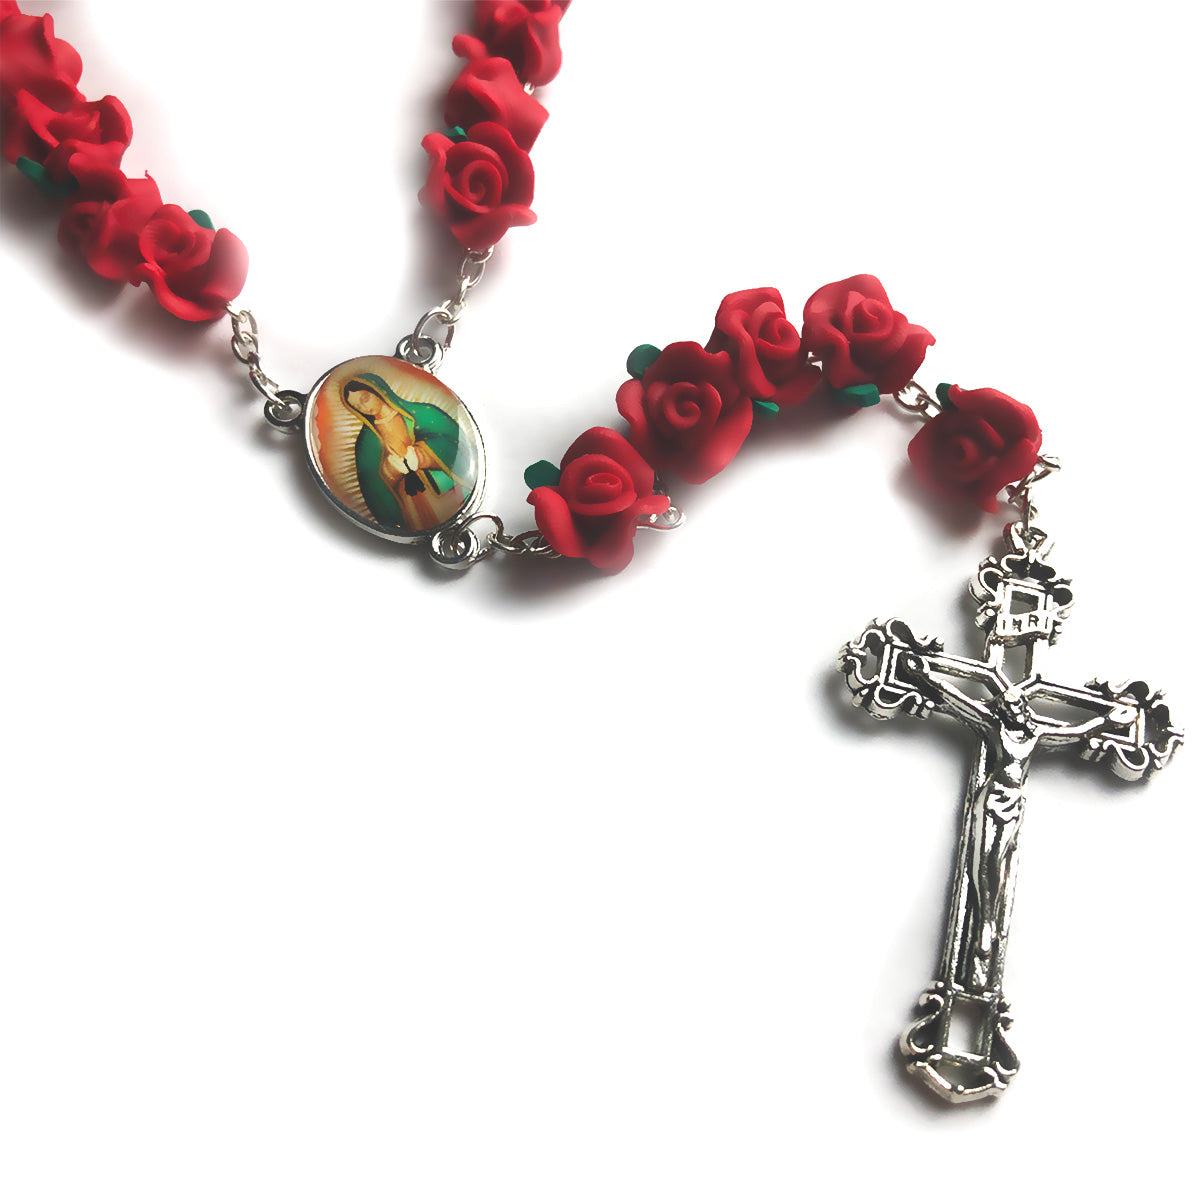 Our Lady of Guadalupe Red Rose Garden Rosary with Velvet Rosary Pouch - Deluxe Boxed